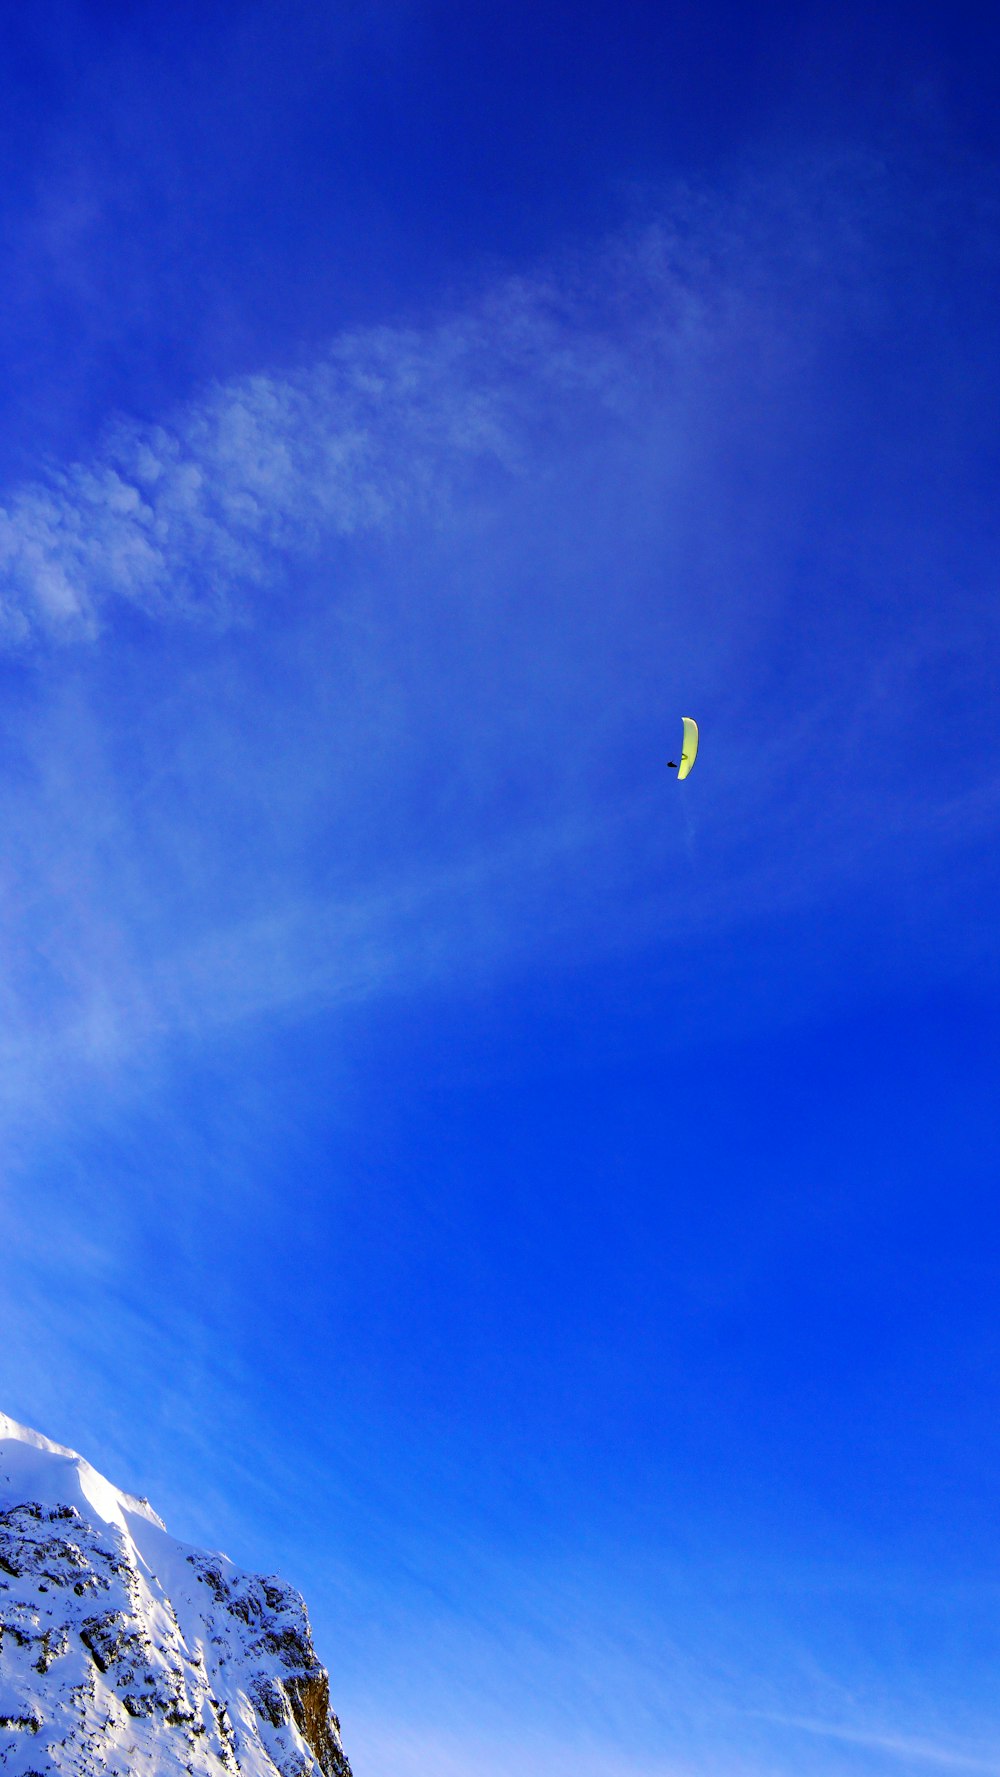 a person flying a kite on a snowy mountain